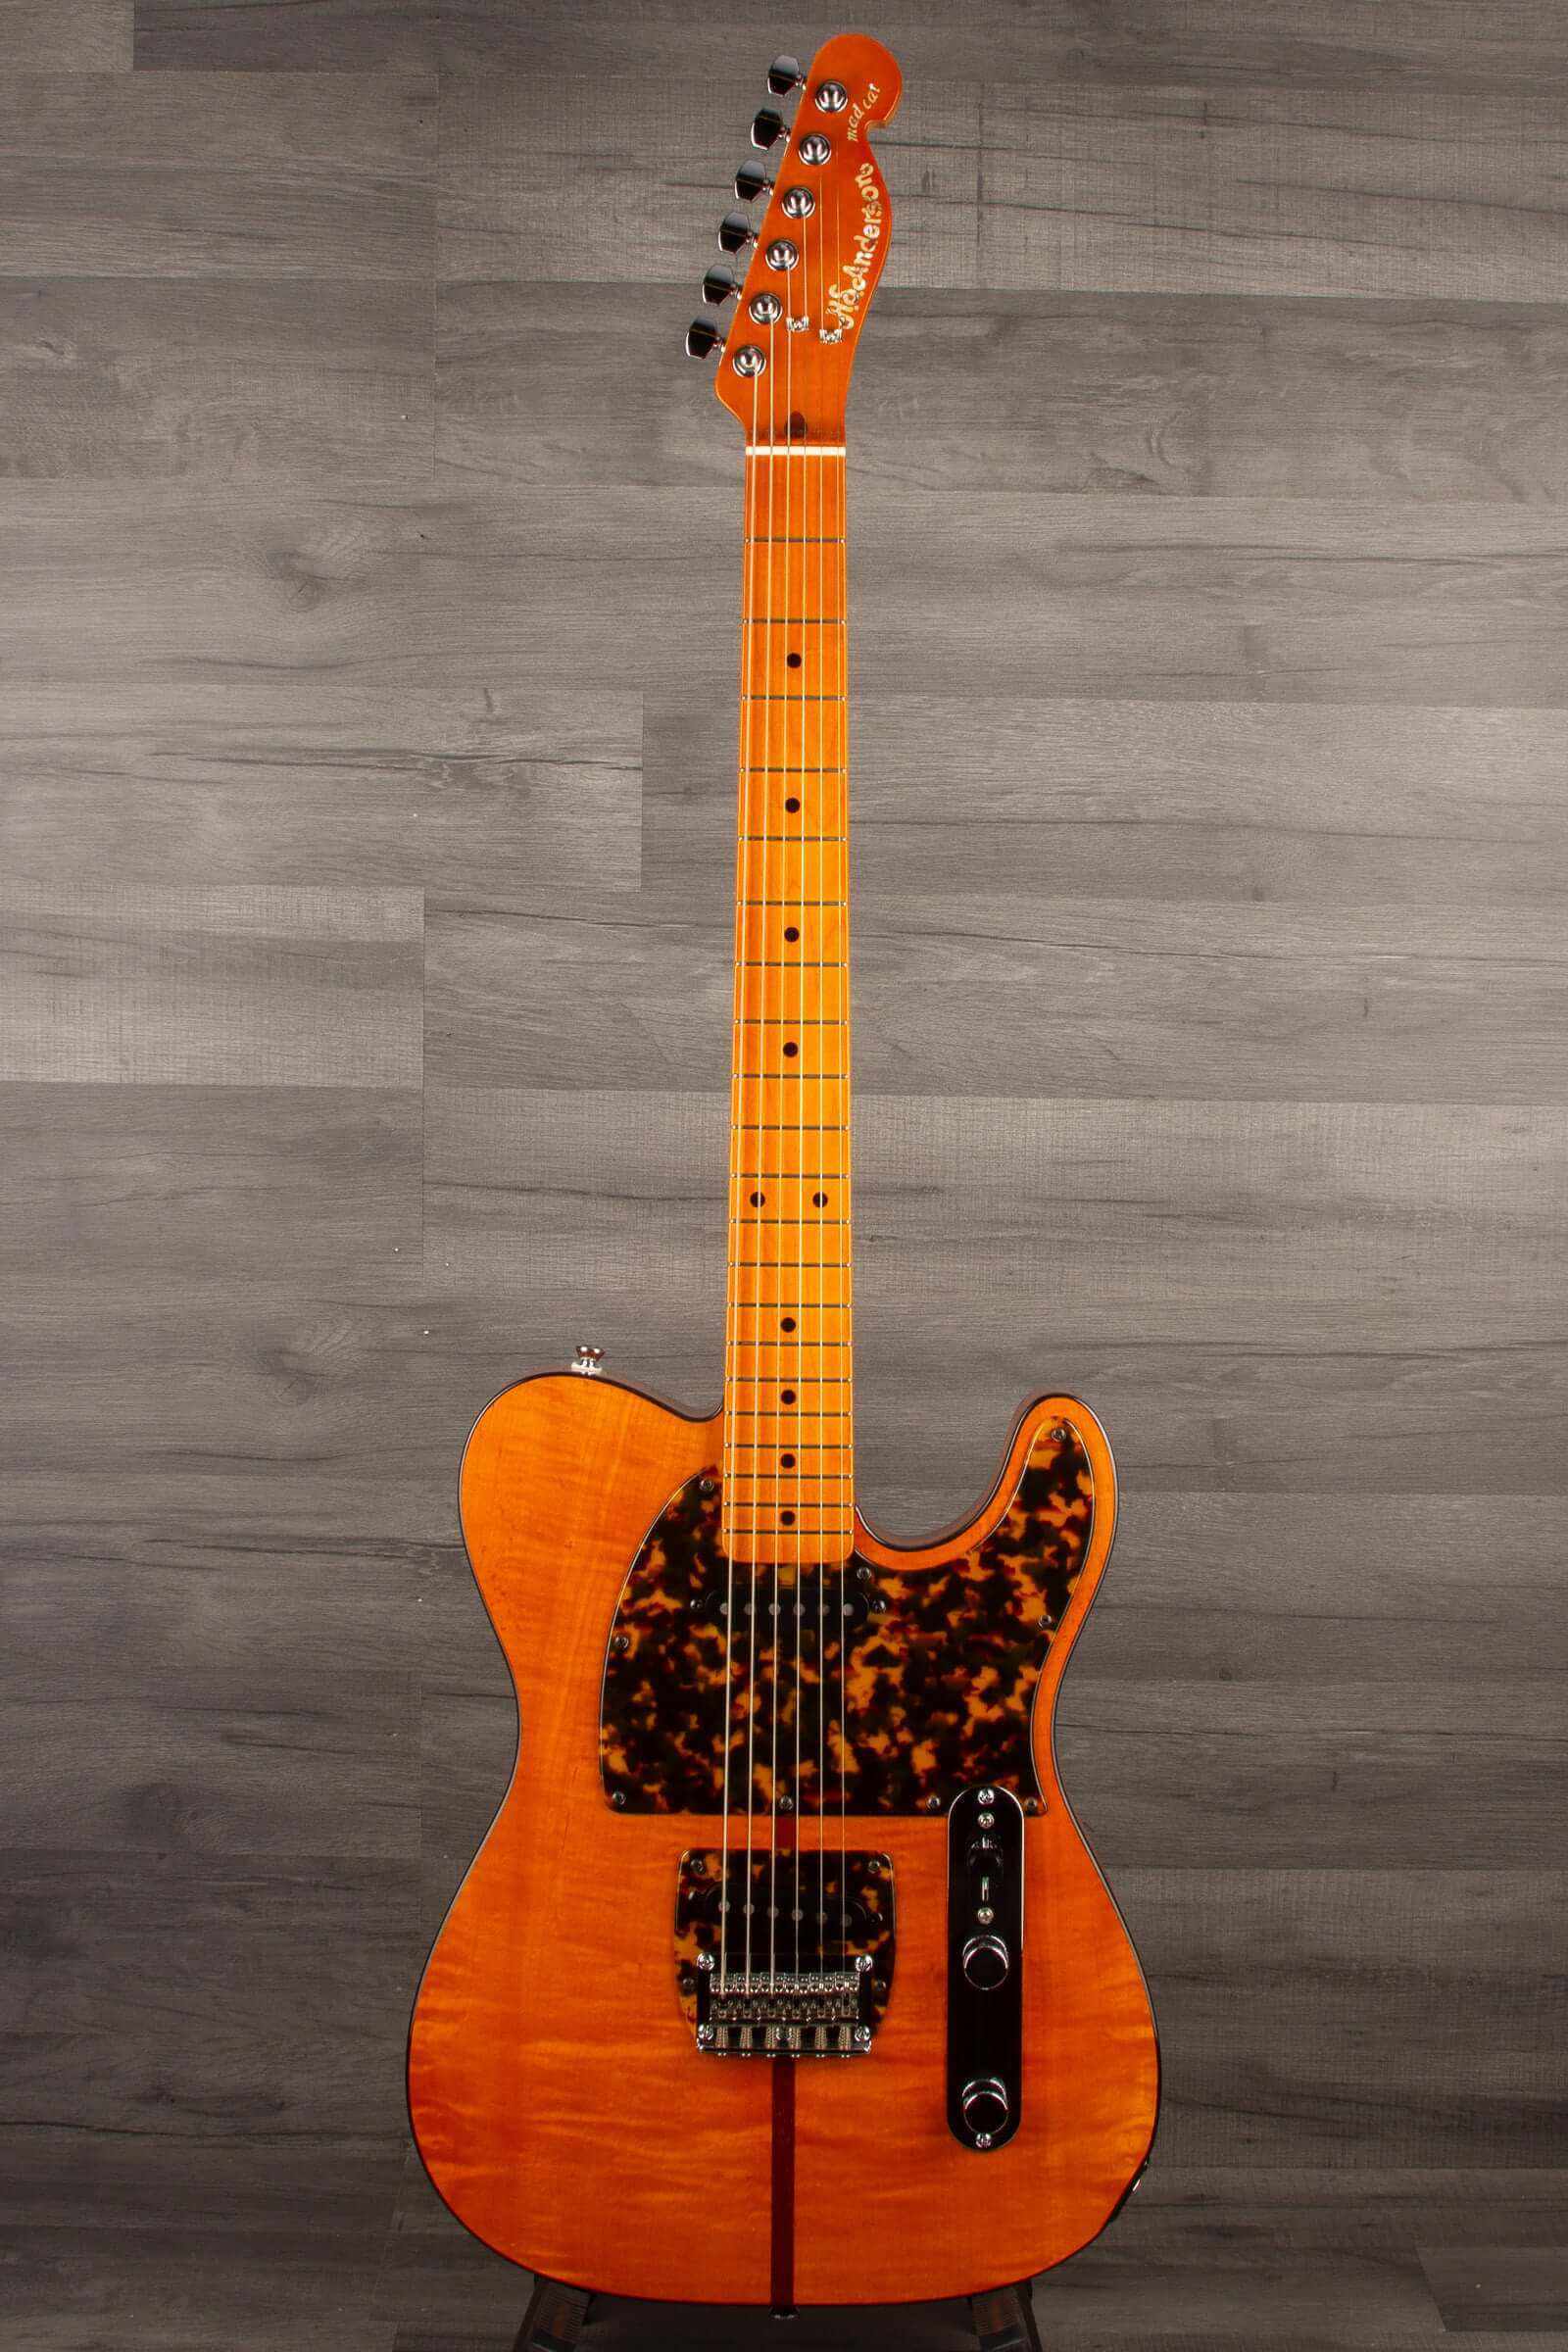 H.S. Anderson - Vintage Re-Issue Madcat MKII